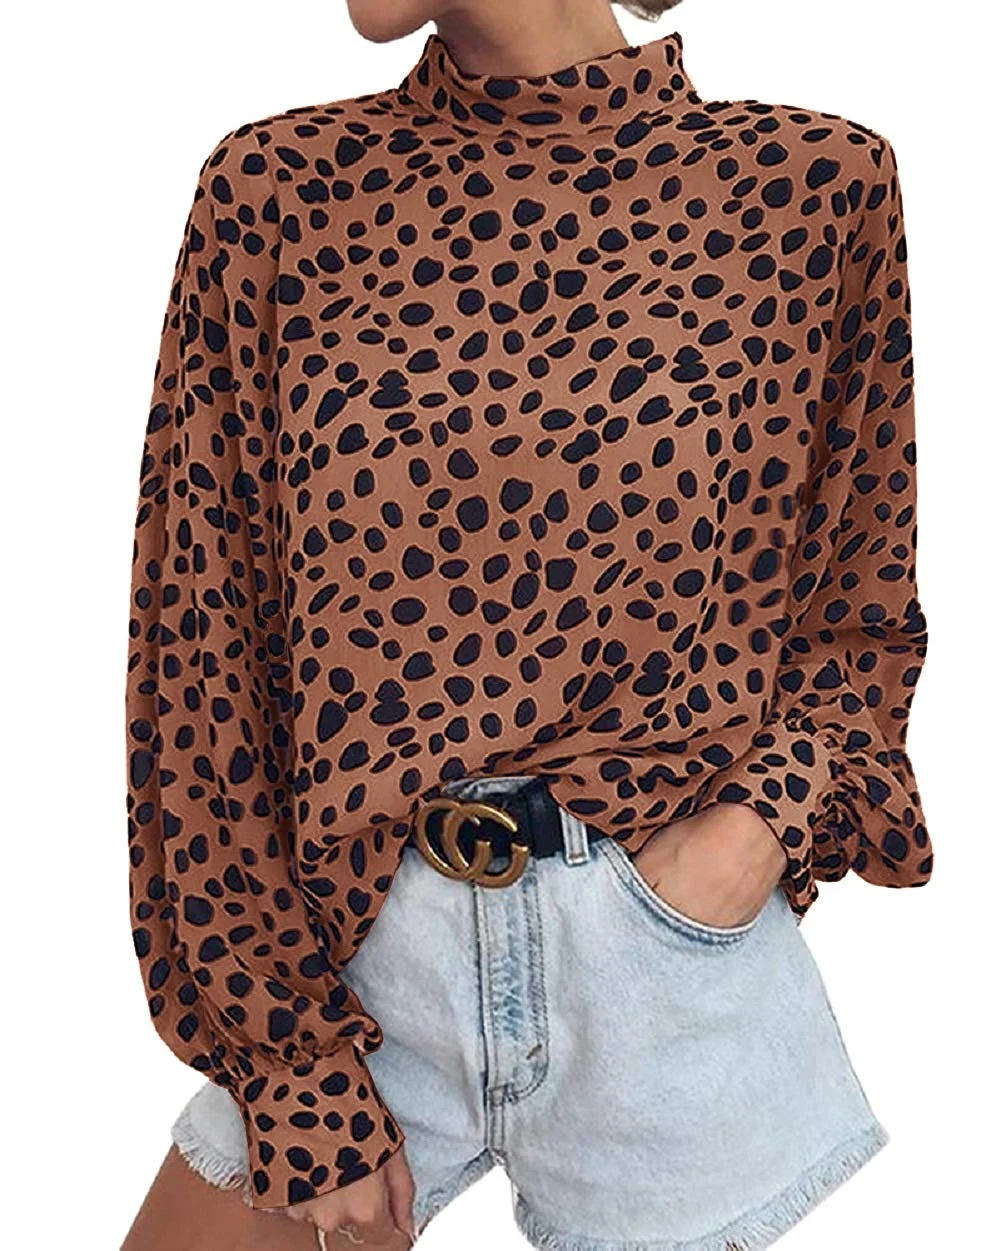 Women's Casual Leopard Print Chiffon Shirts Turtle Neck Long Sleeve Curved Blouse Top